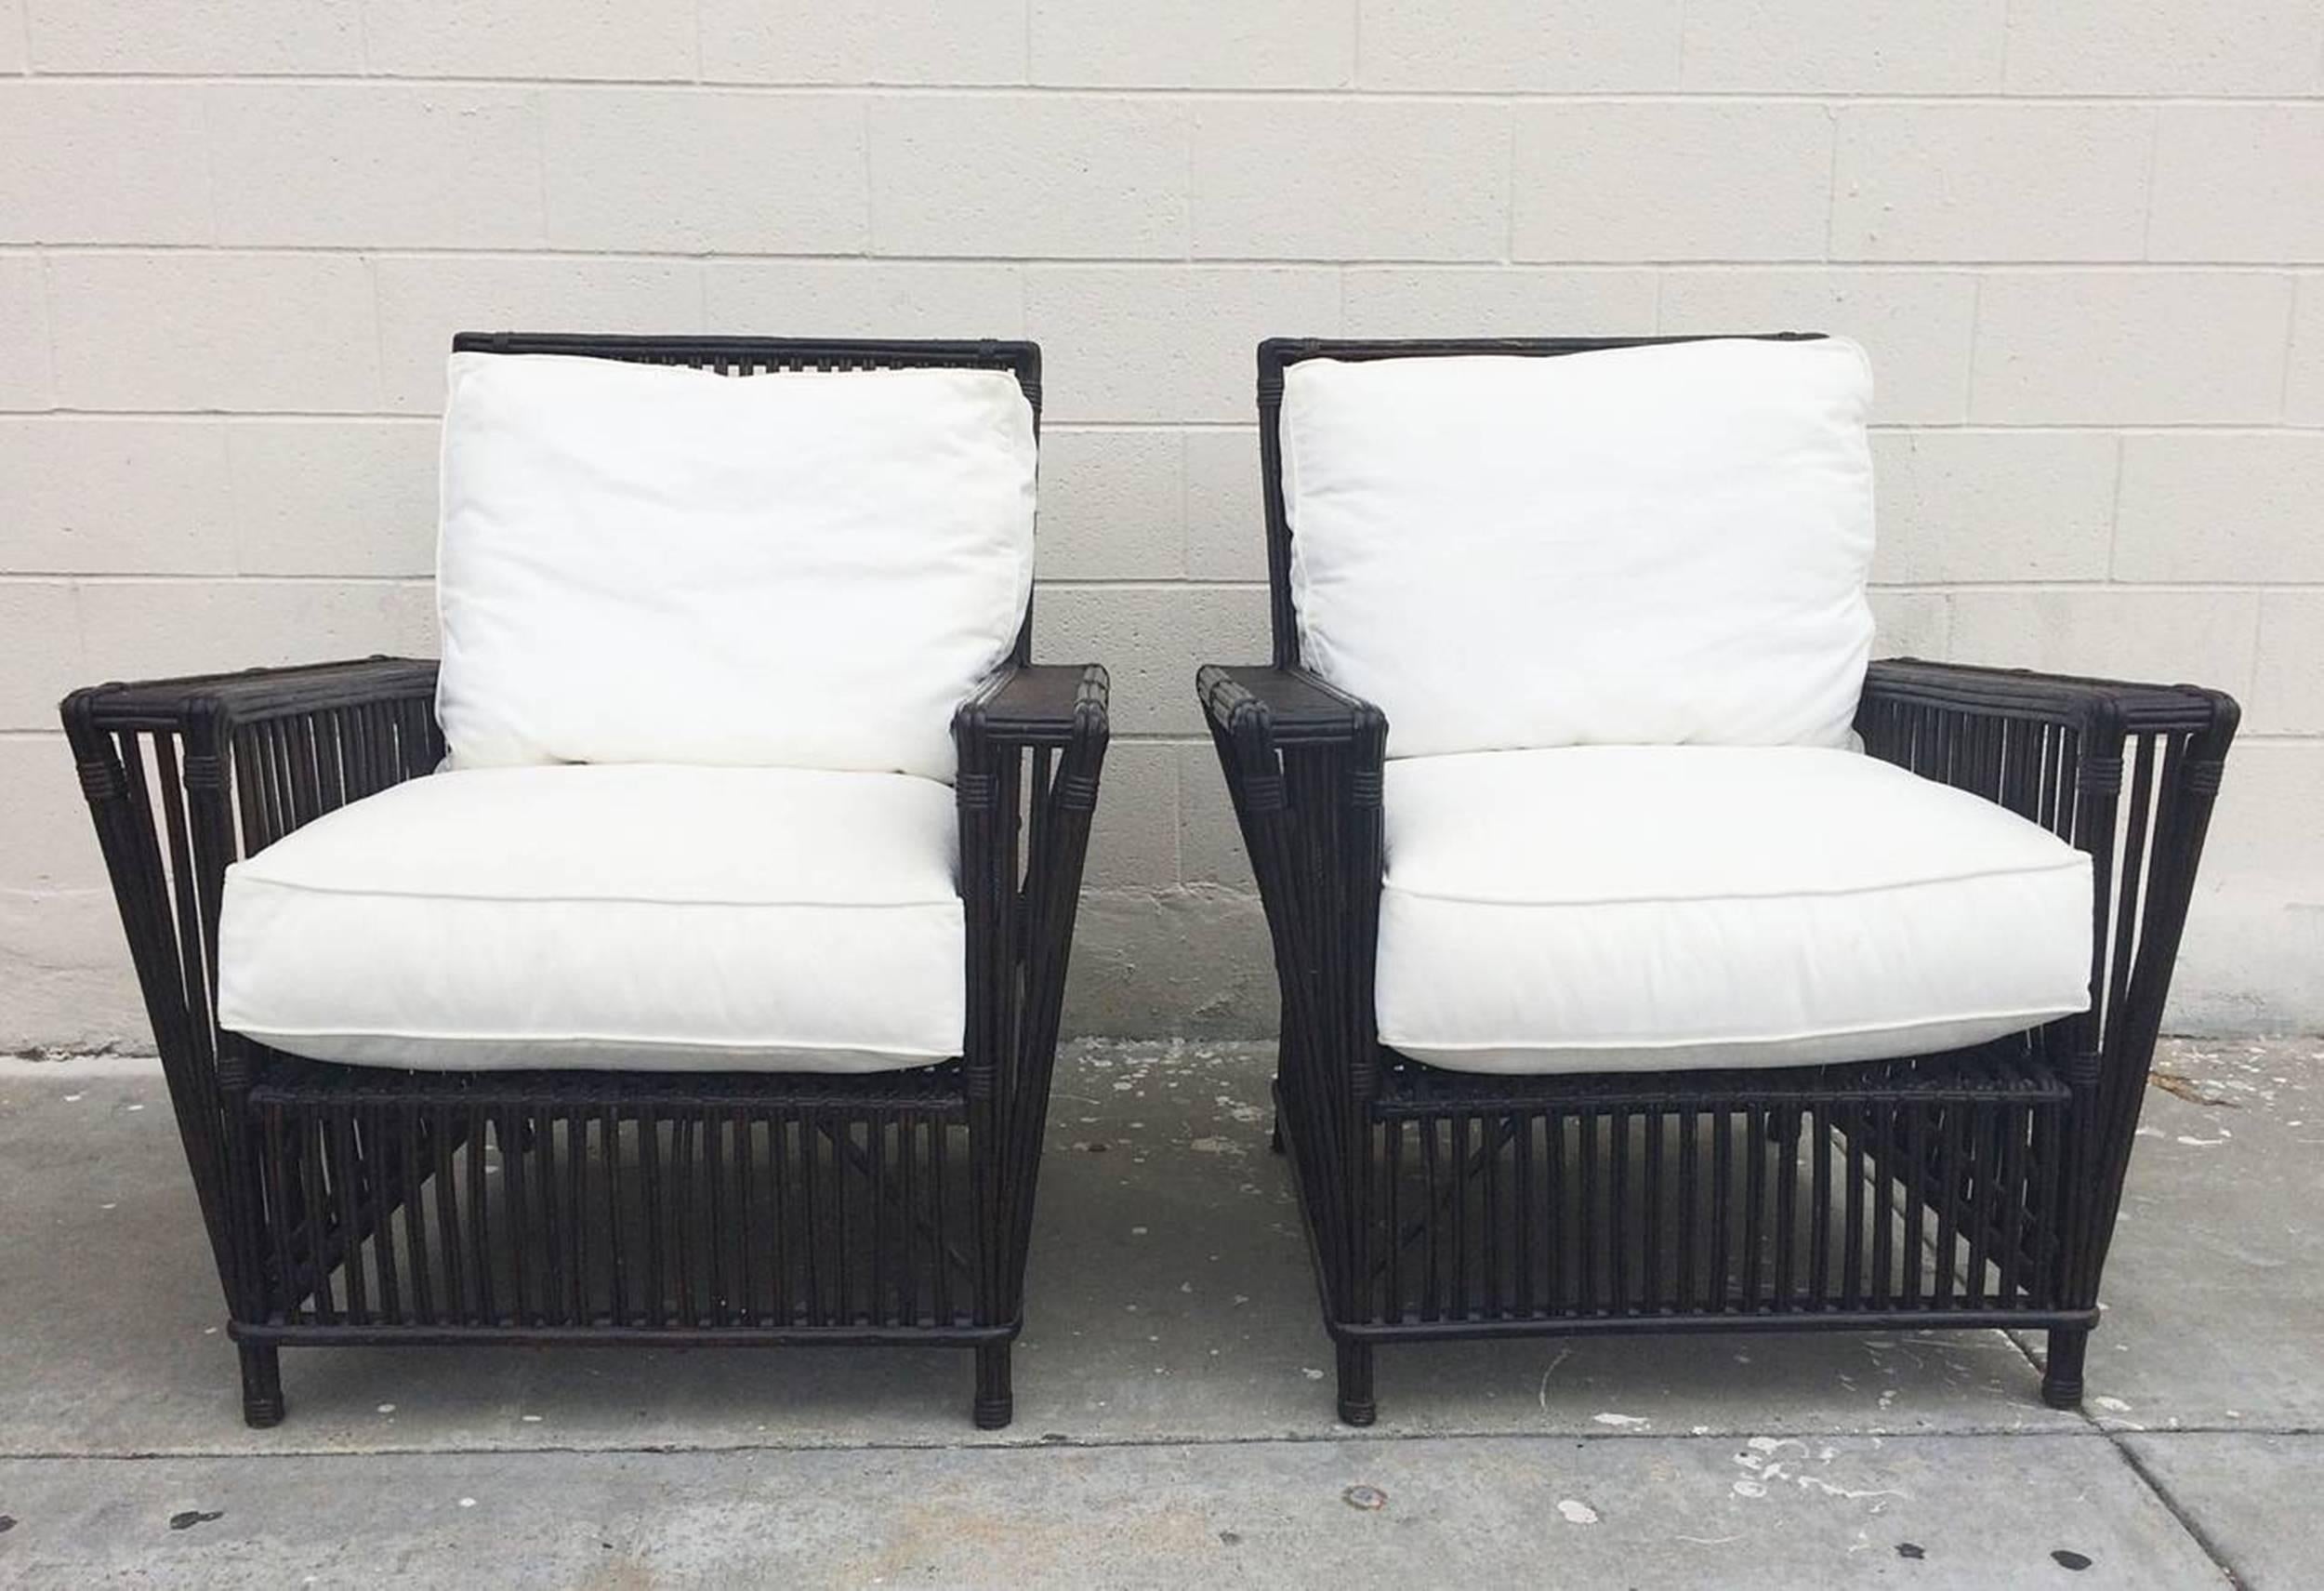 Beautiful pair of patio chairs made out of wicker or bamboo reeds and upholstered in white canvas fabric.
The chairs are in excellent condition, the seats can be upholstered in COM or COL at no additional charge.

The chairs have great lines,